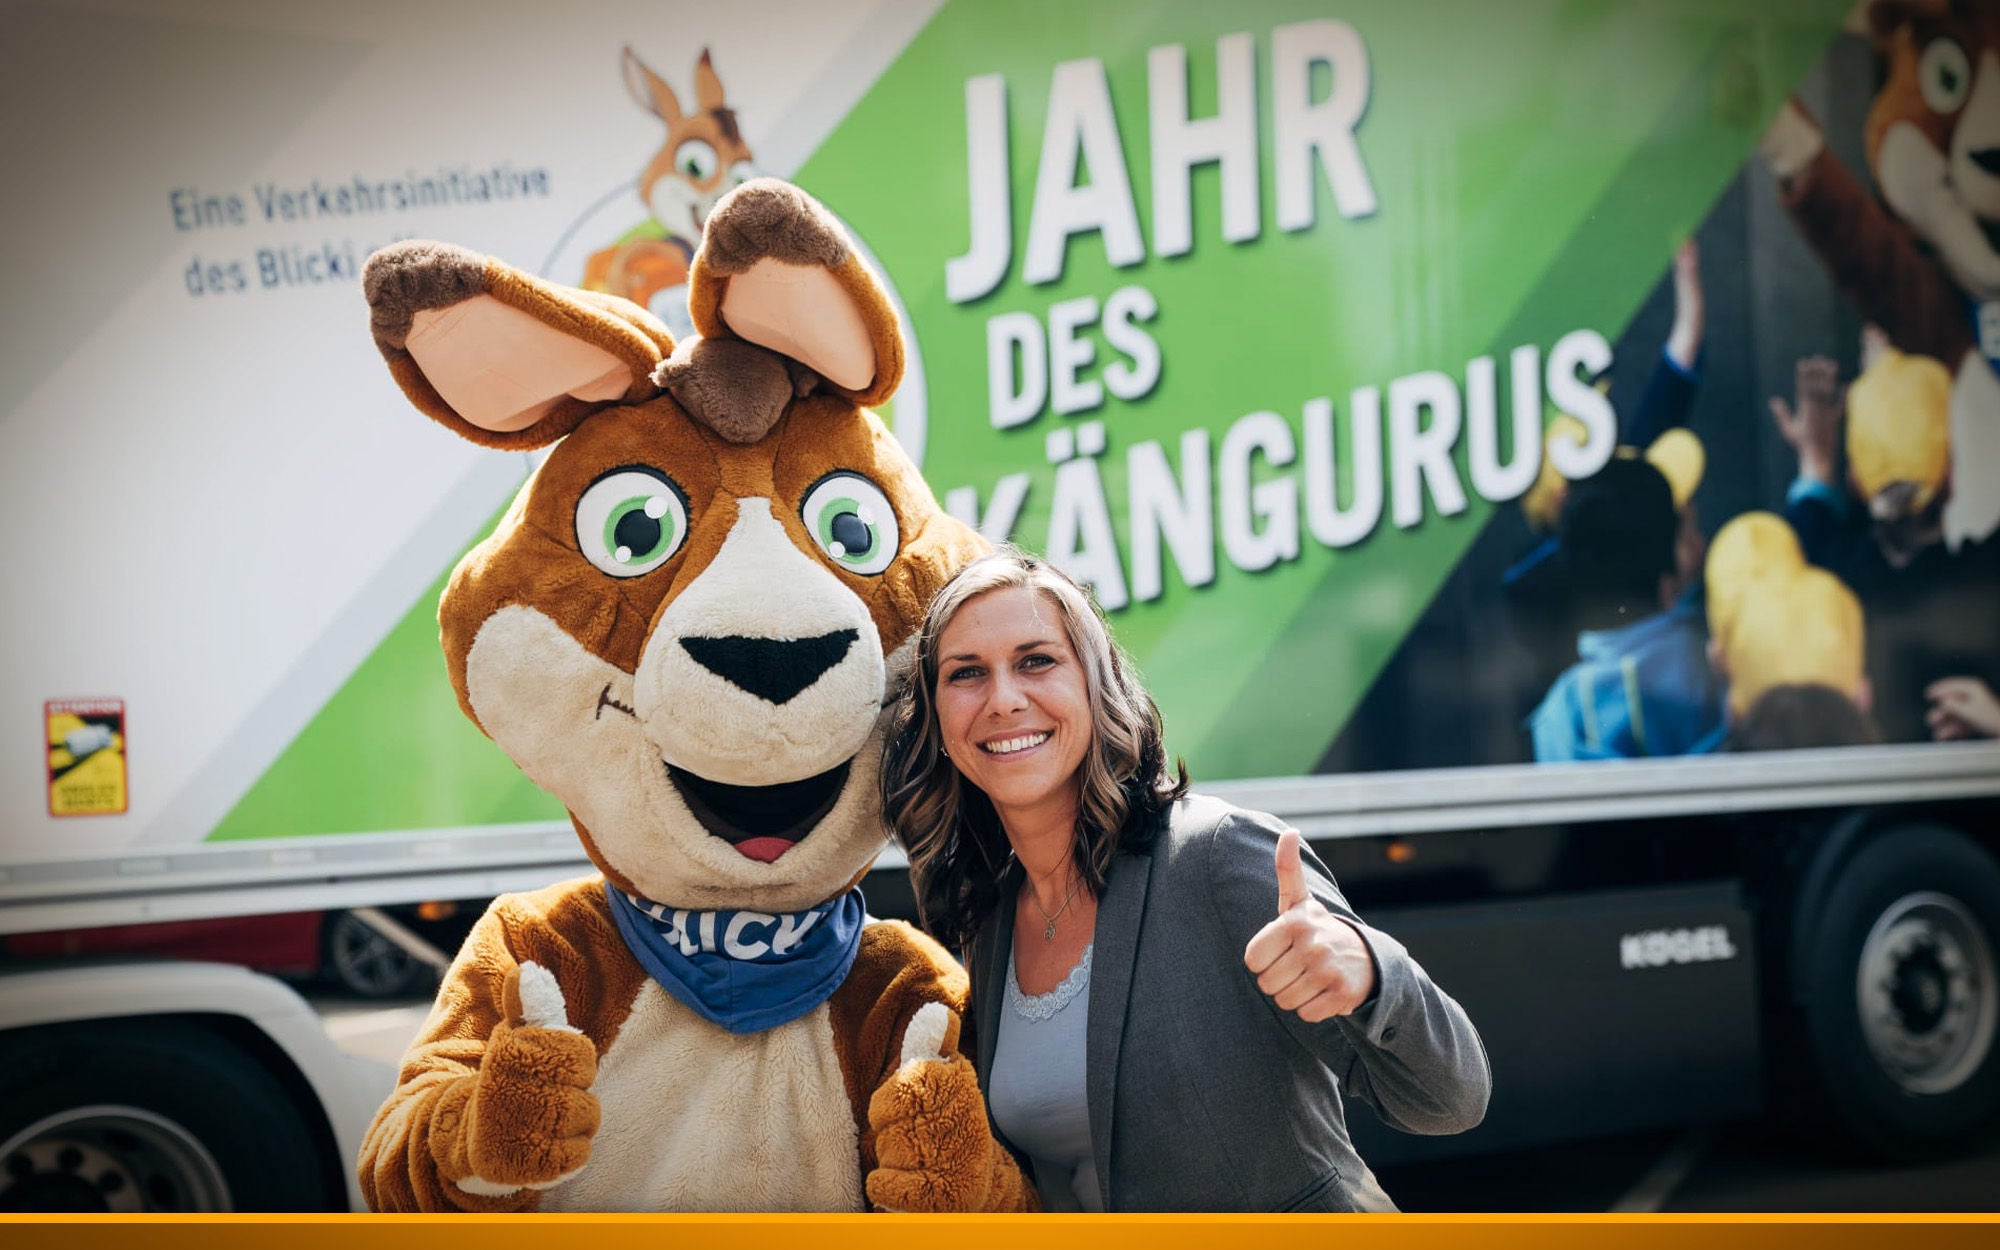 Female trucker with a mascot in front of a truck